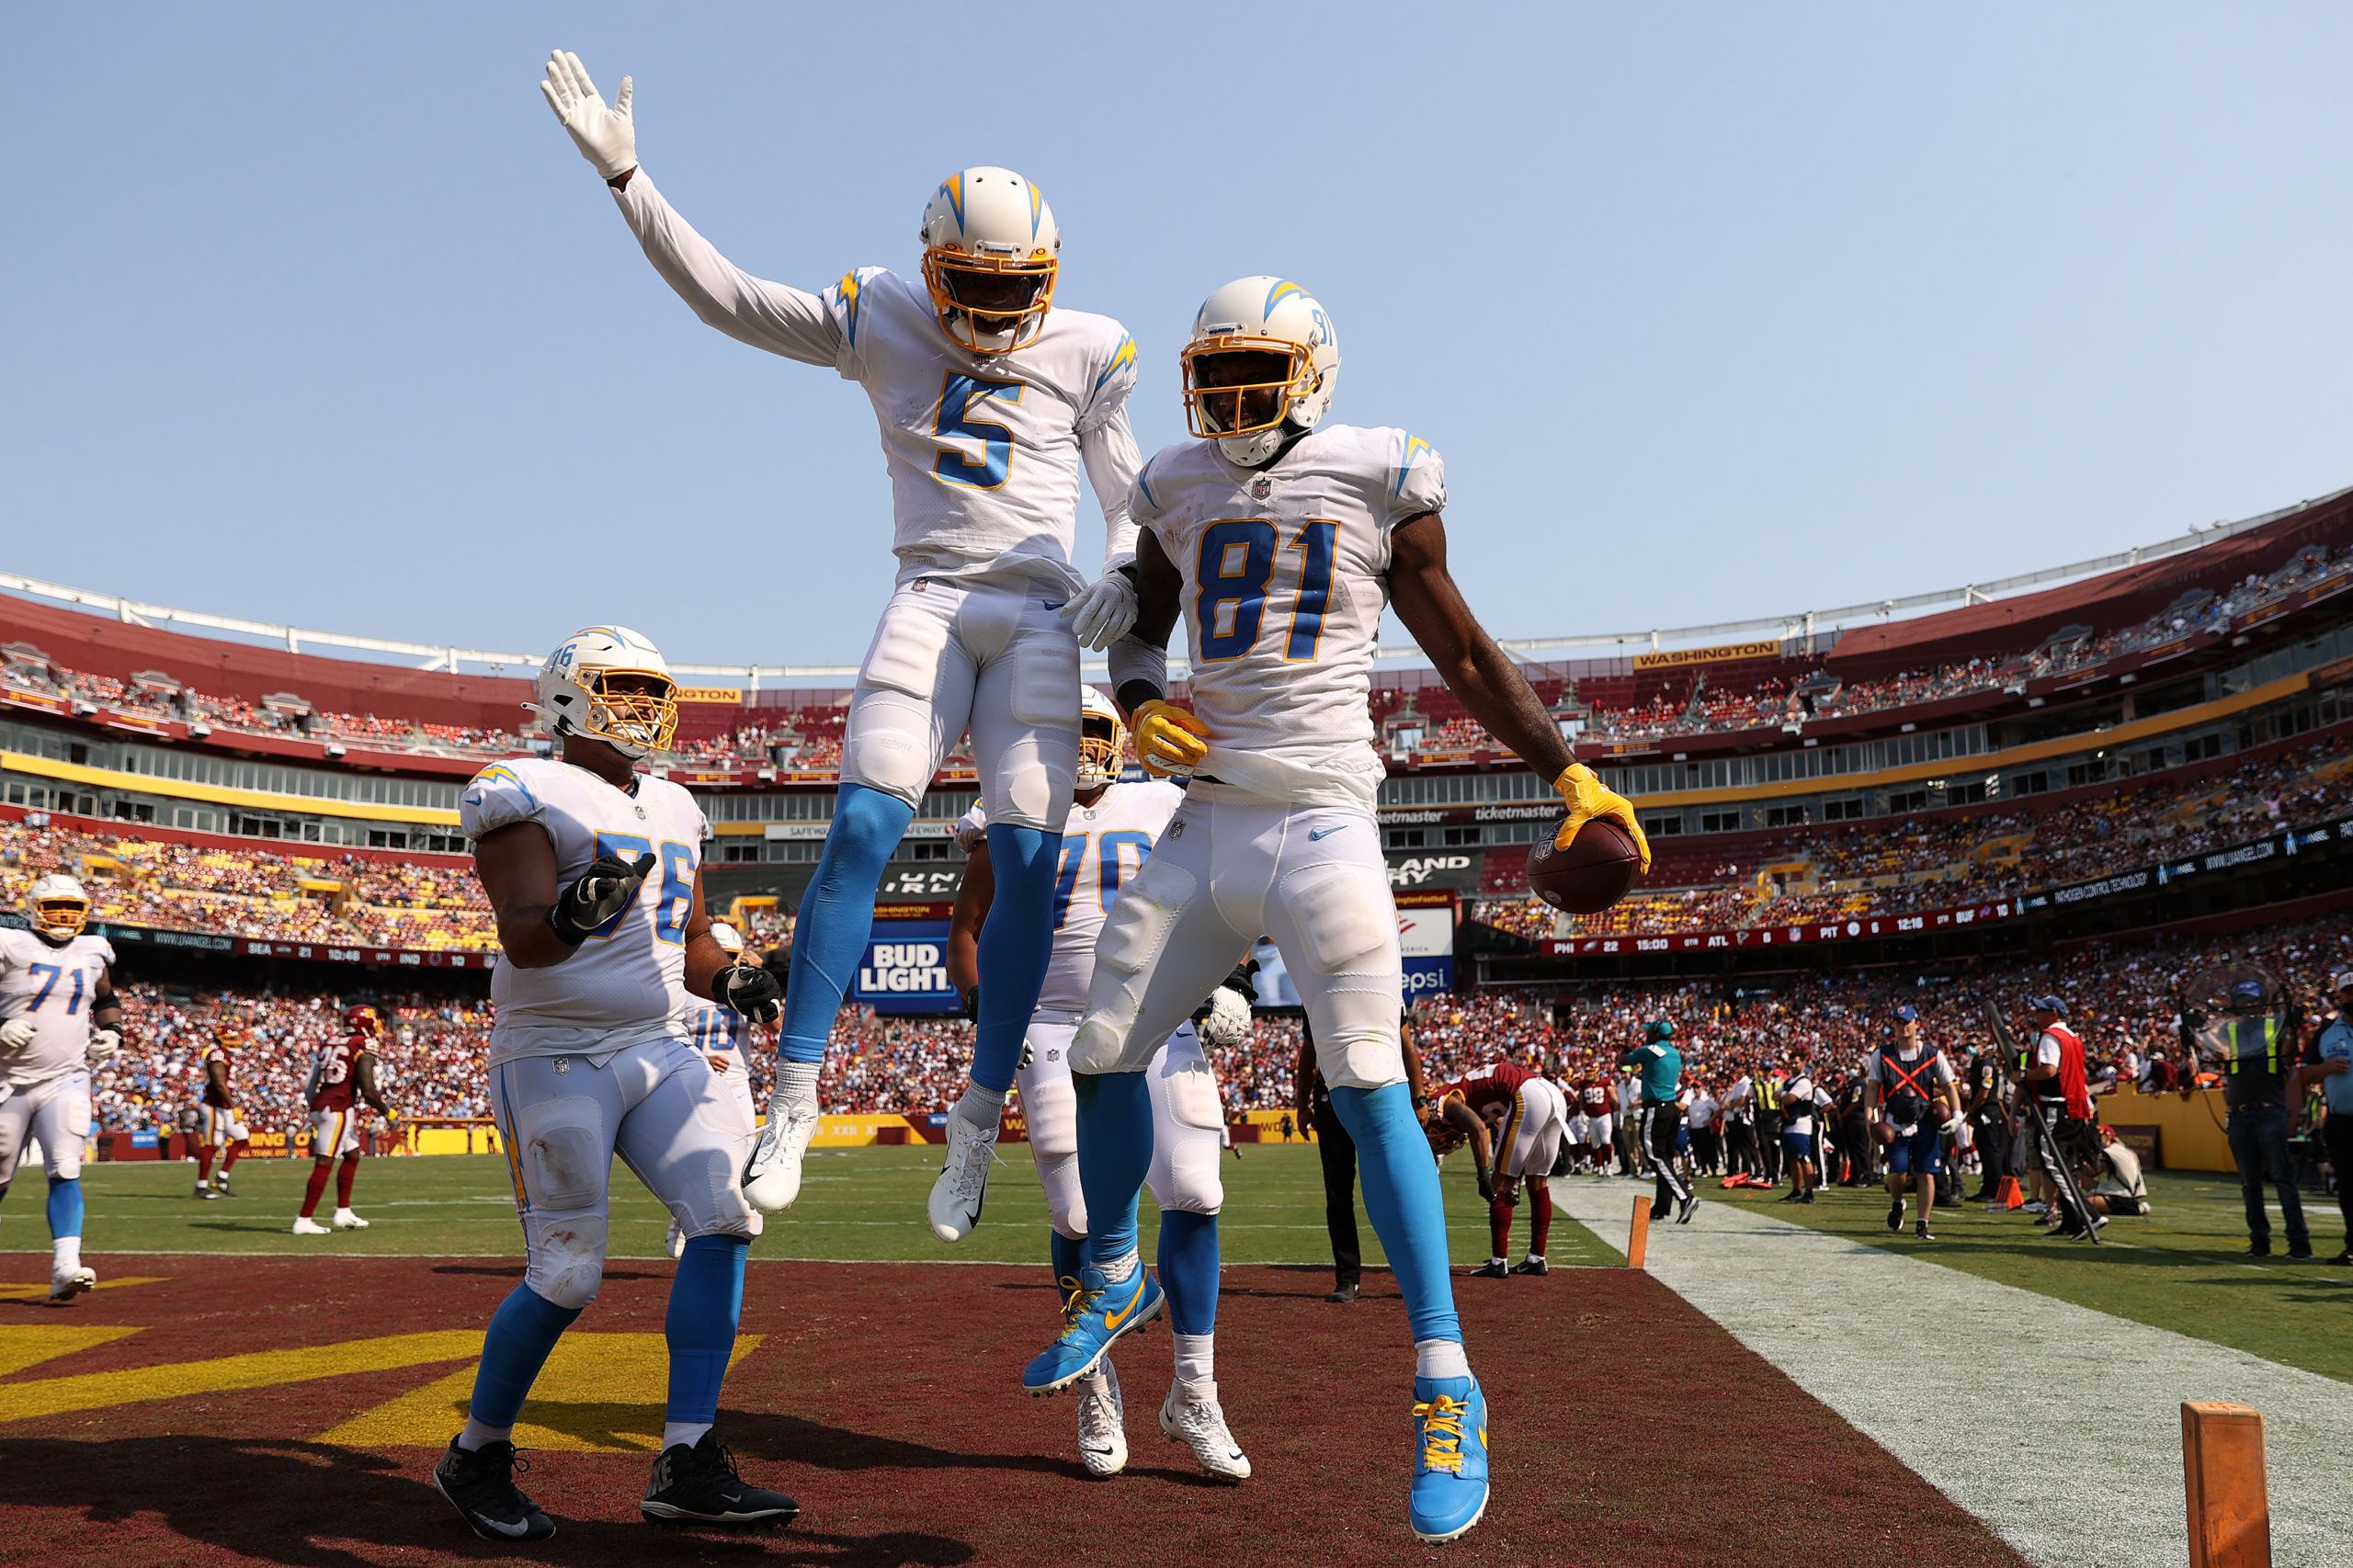 LANDOVER, MARYLAND - SEPTEMBER 12: Mike Williams #81 of the Los Angeles Chargers celebrates with teammates after catching a three yard touchdown reception during the fourth quarter against the Washington Football Team at FedExField on September 12, 2021 in Landover, Maryland. Patrick Smith/Getty Images